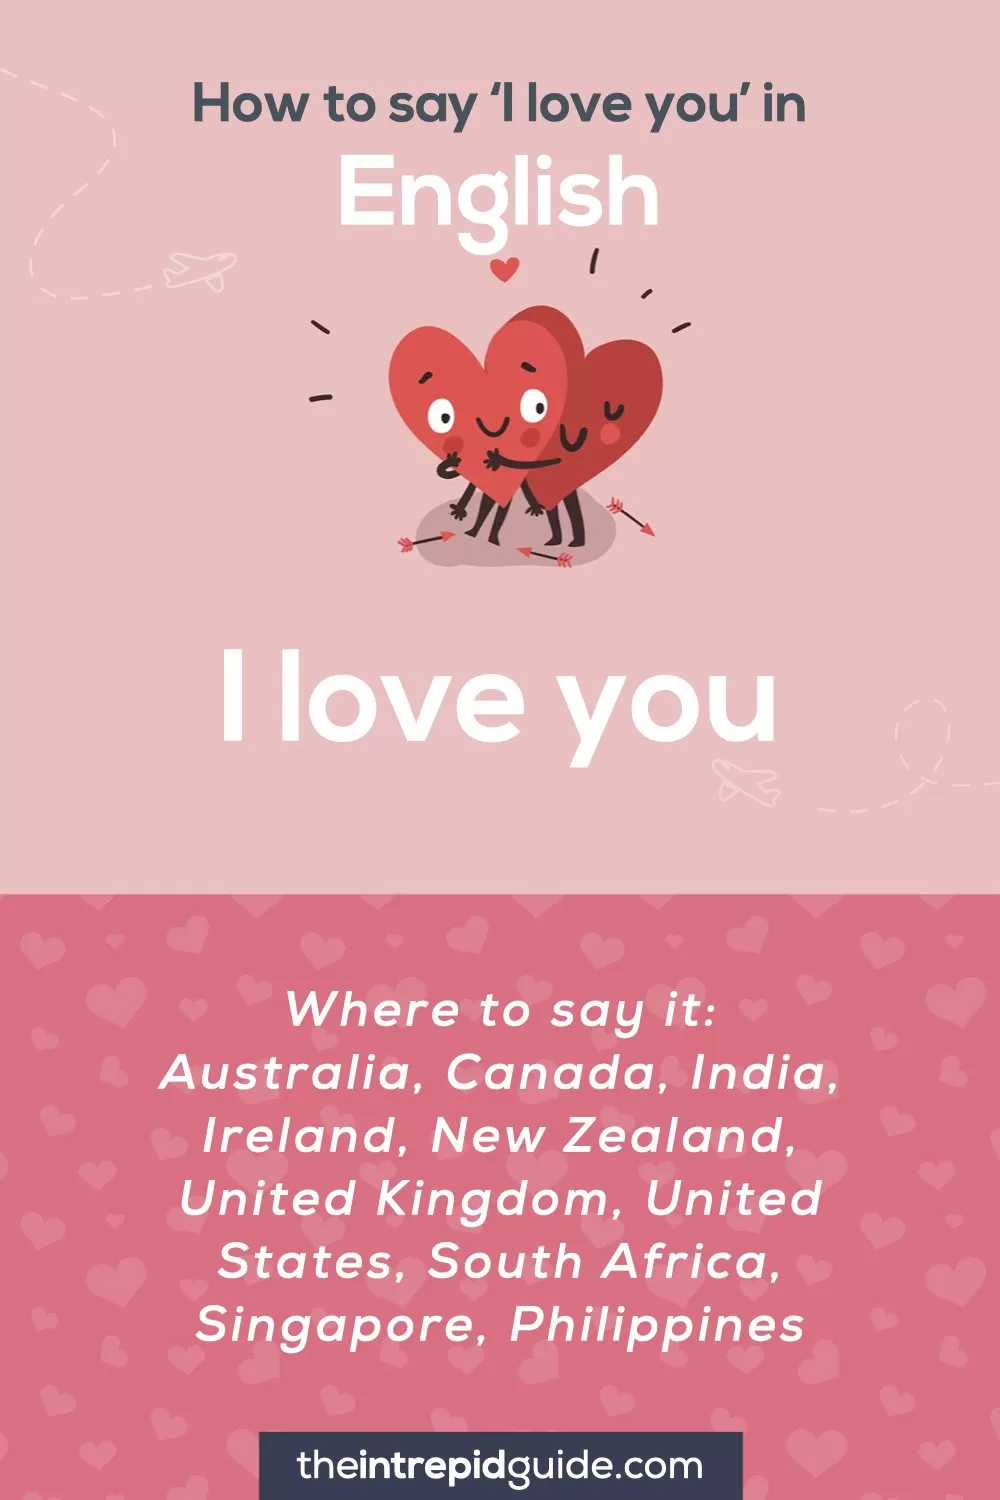 How to say I love you in different languages - English - I love you